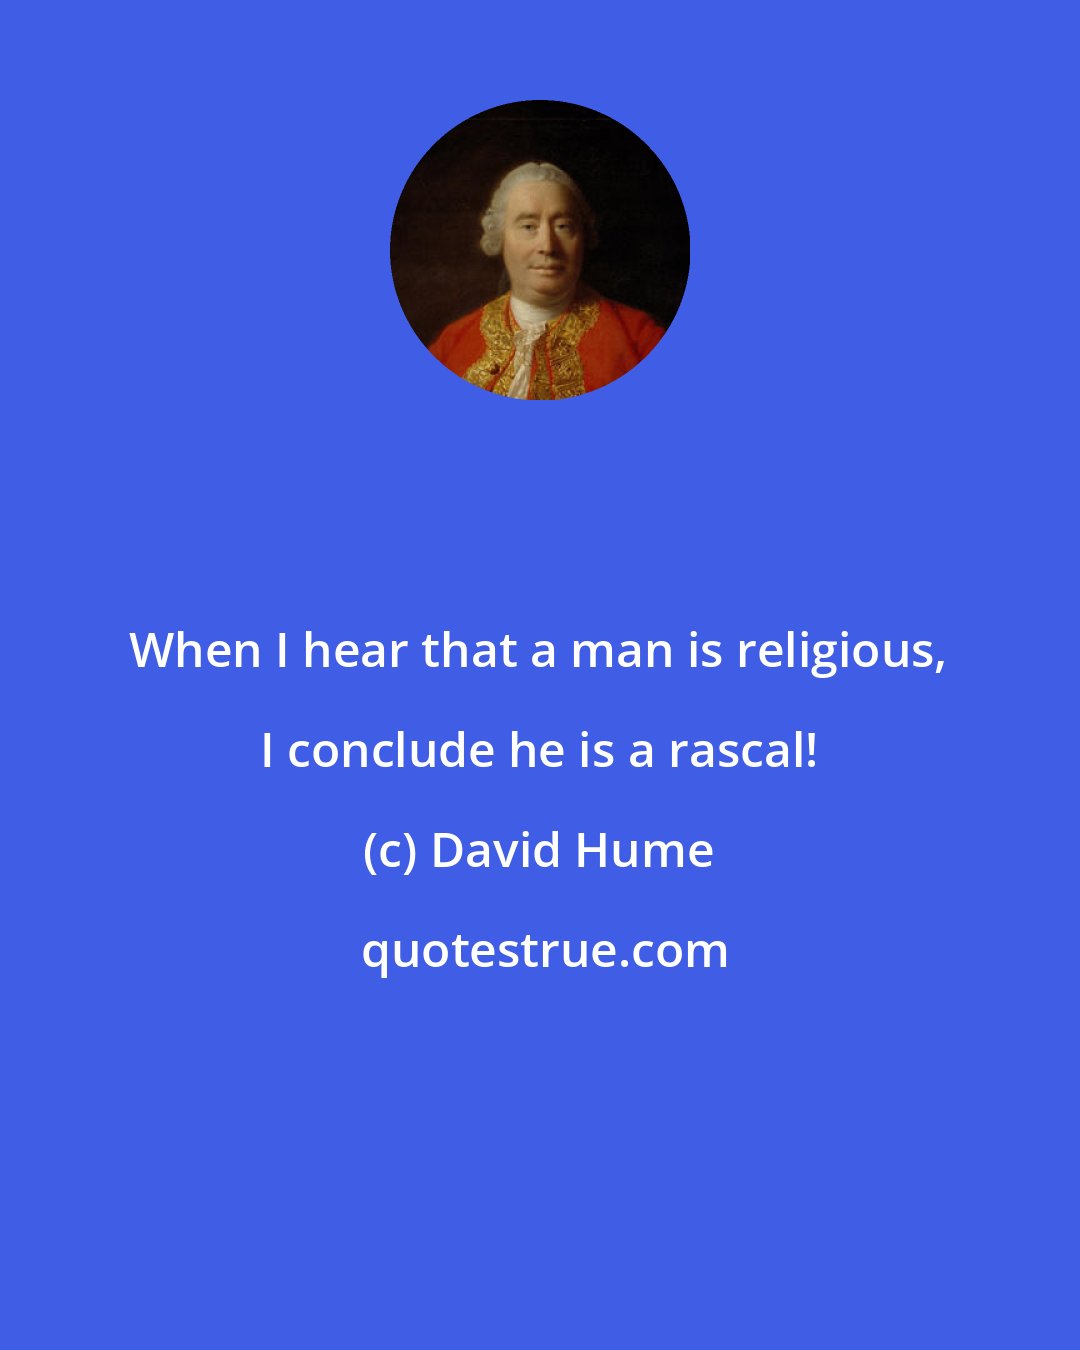 David Hume: When I hear that a man is religious, I conclude he is a rascal!